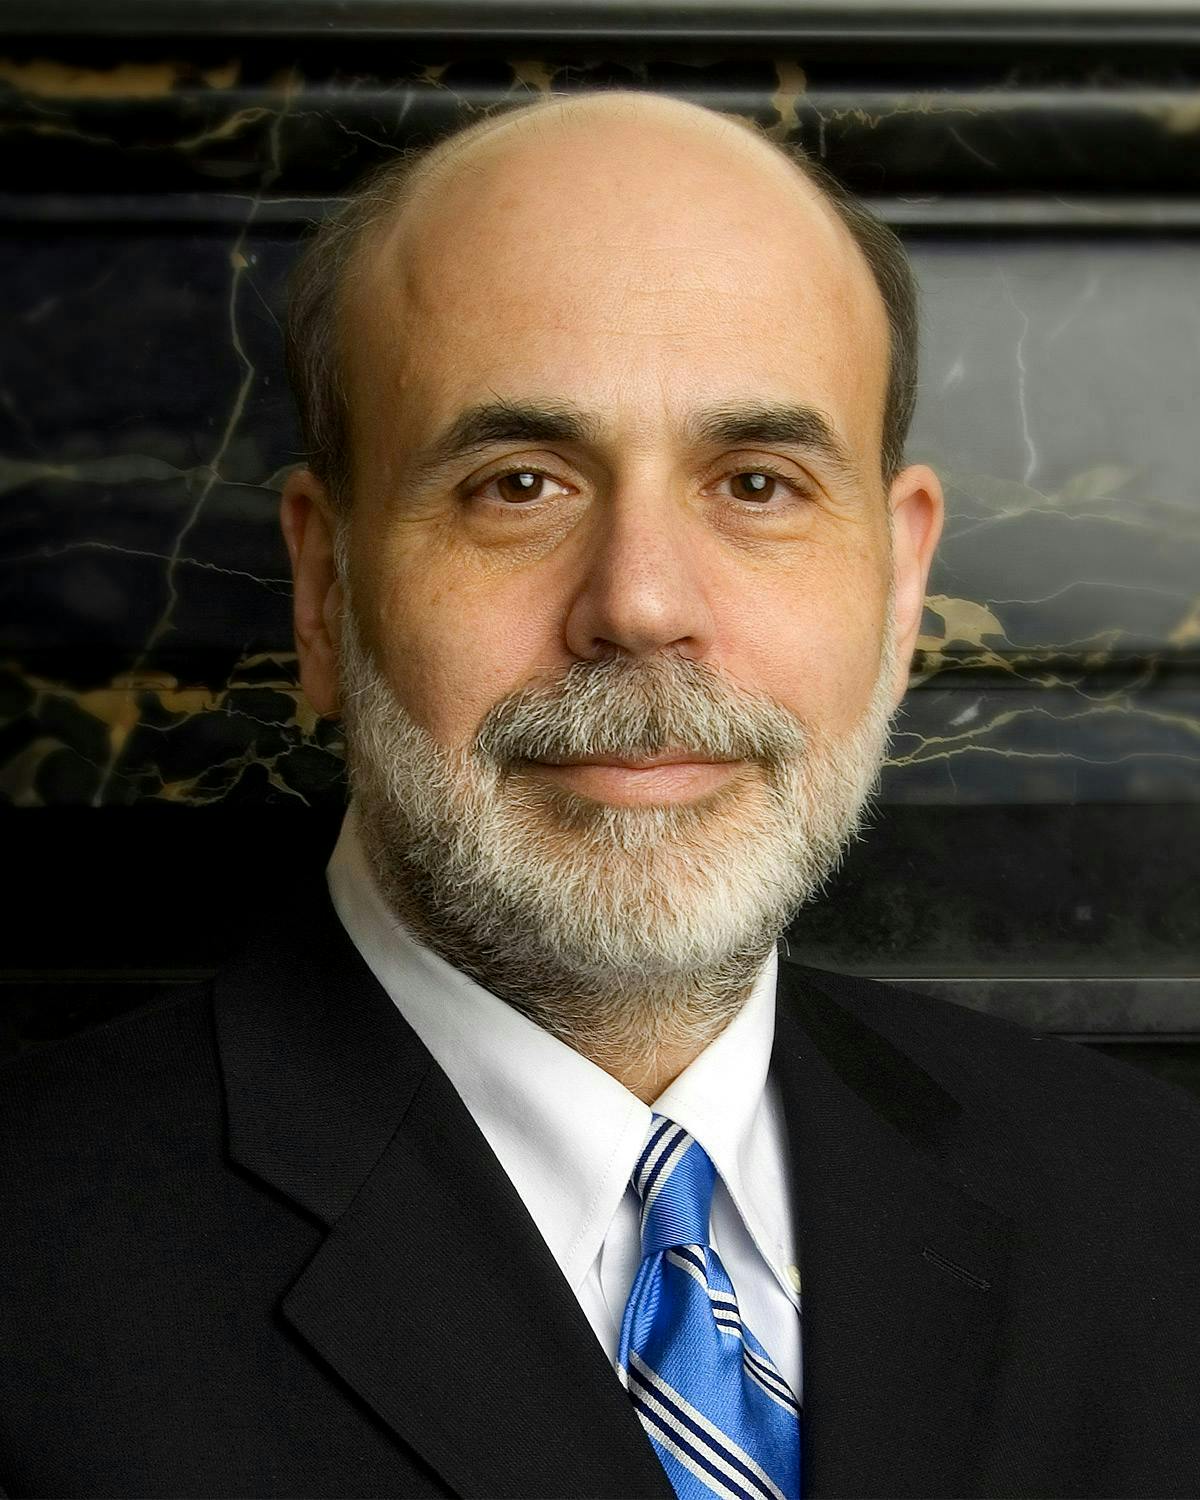 A bald man with a gray beard is wearing a suit and blue striped tie, looking directly at the camera against a dark marble background.